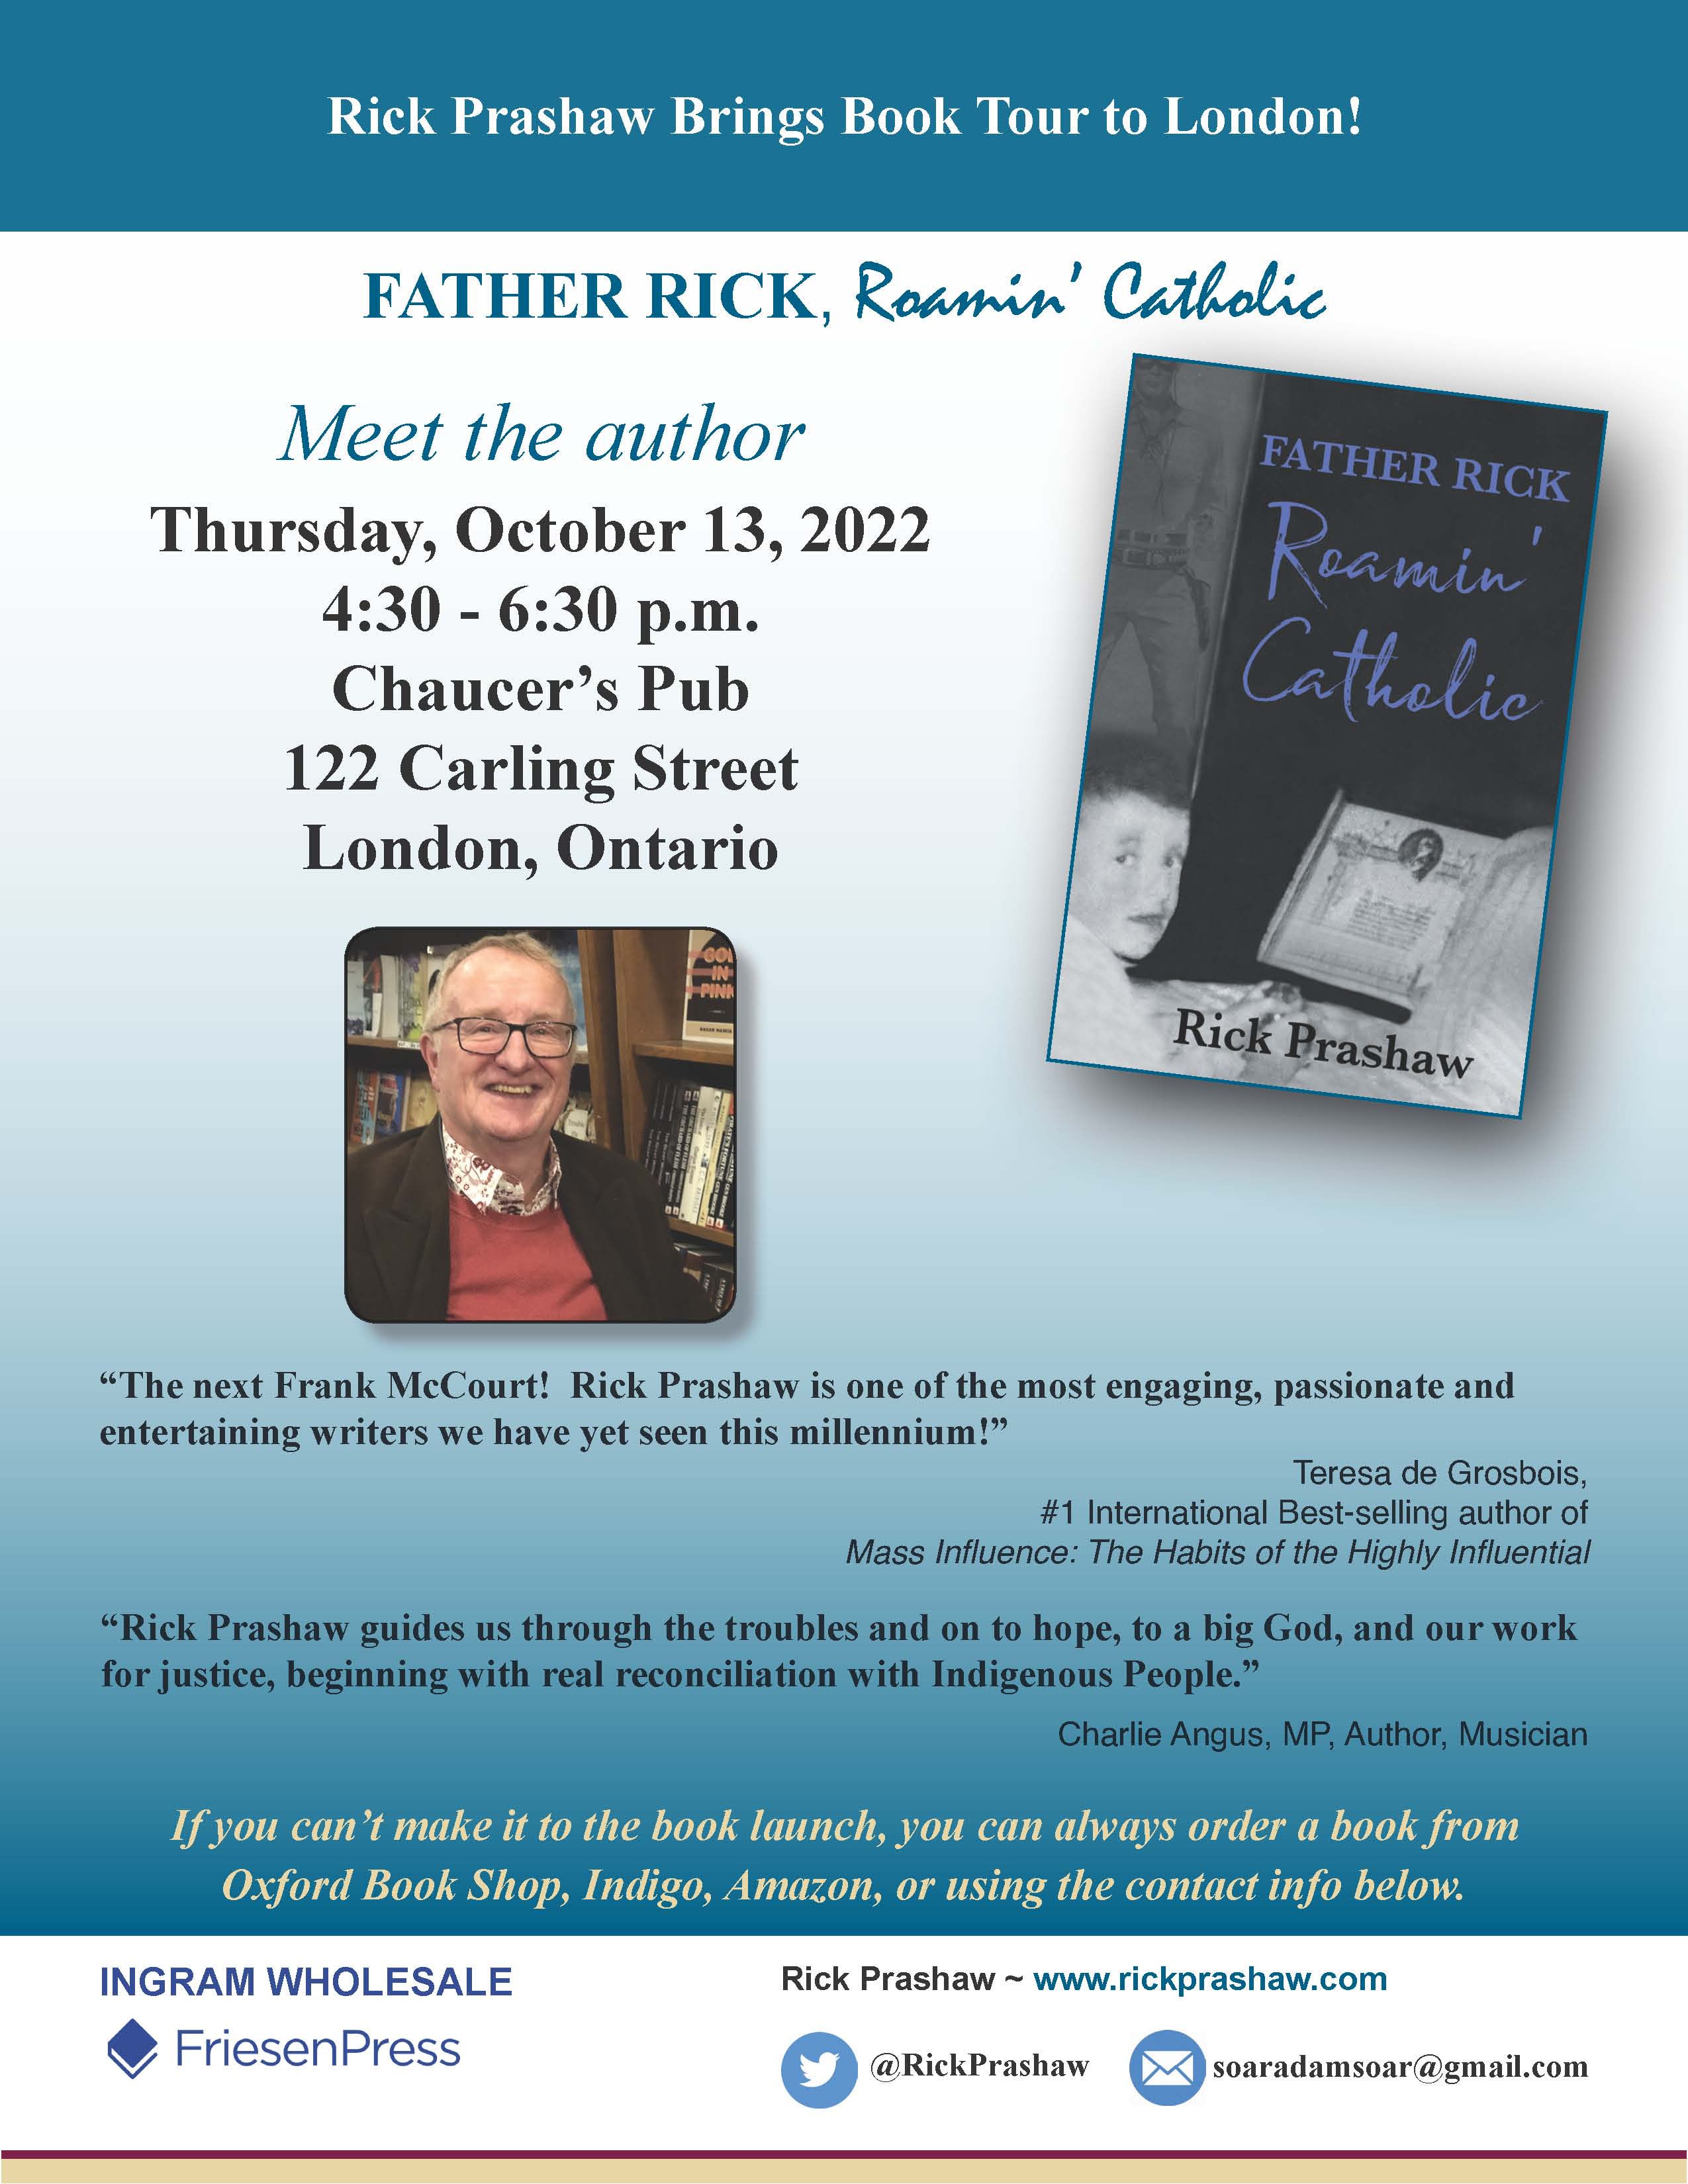 Flyer for Author Rick Prashaw book event in London, ON. at Chaucer's Pub